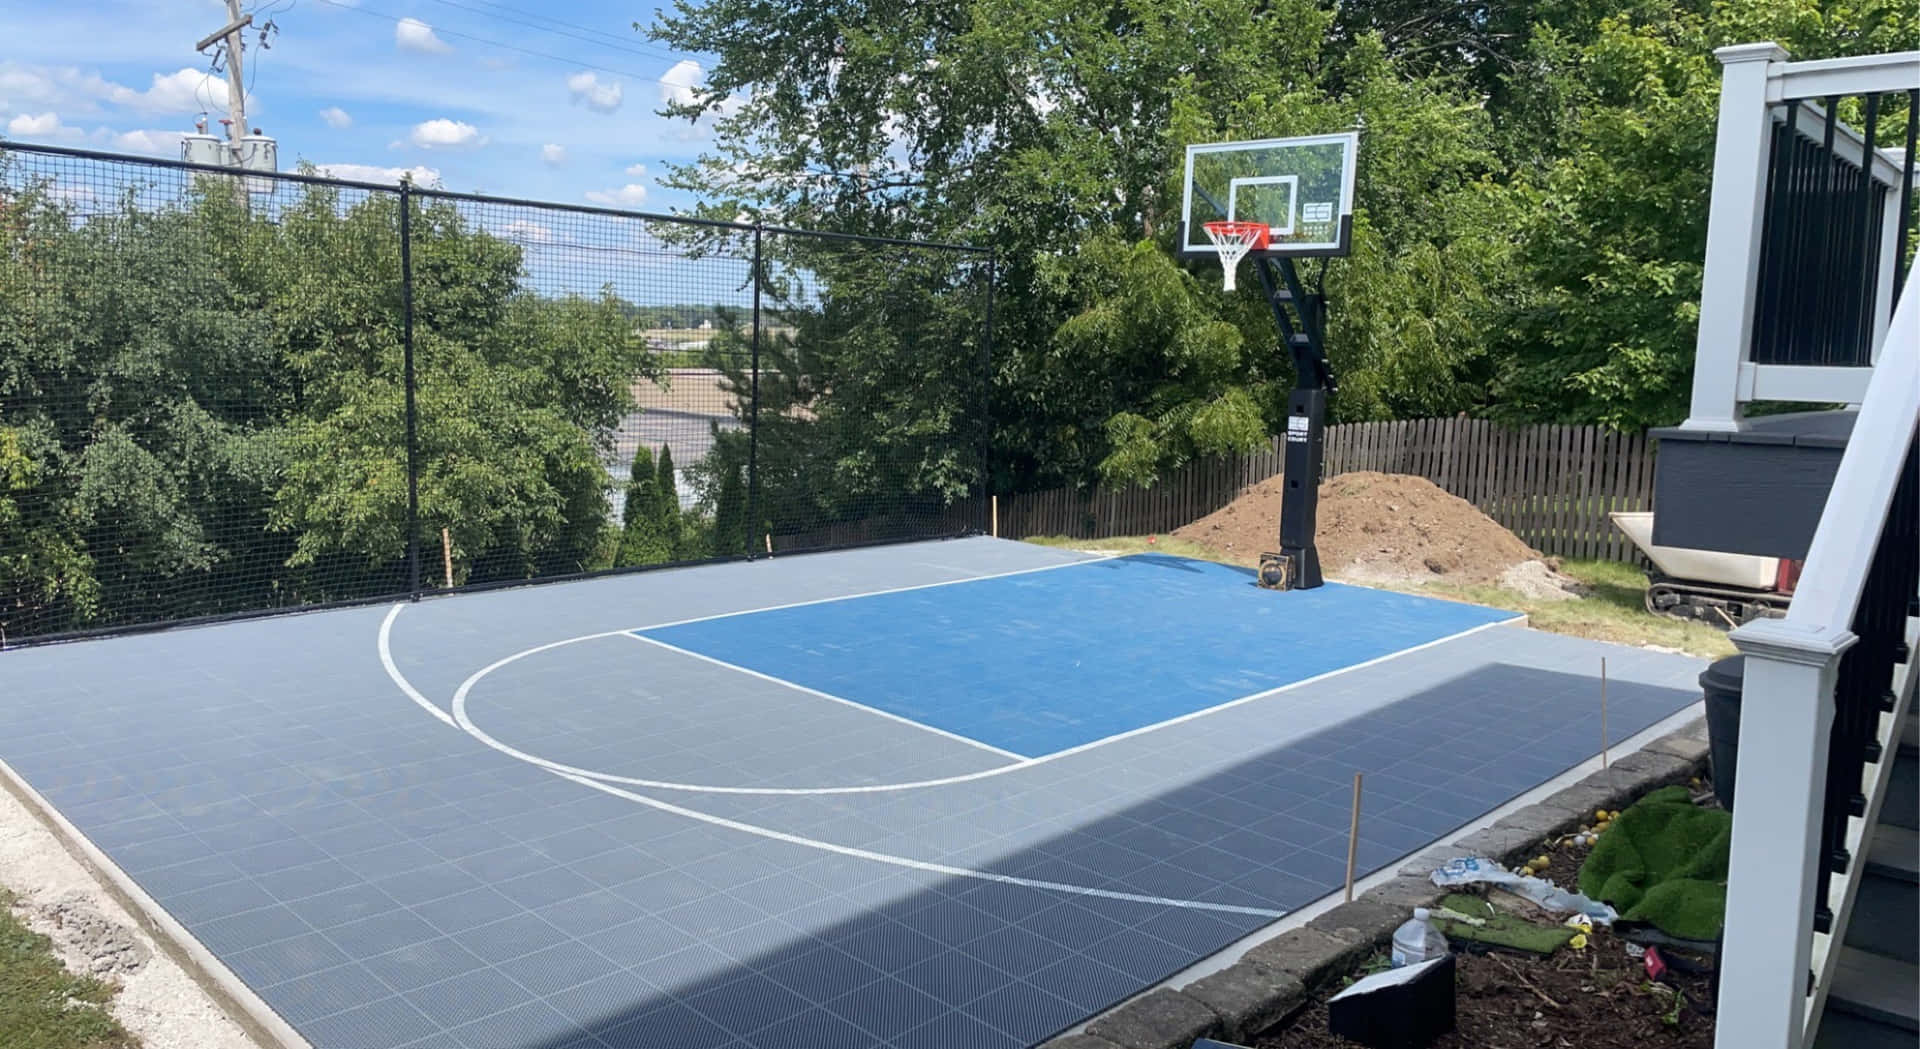 Blue Basketball Court Pictures